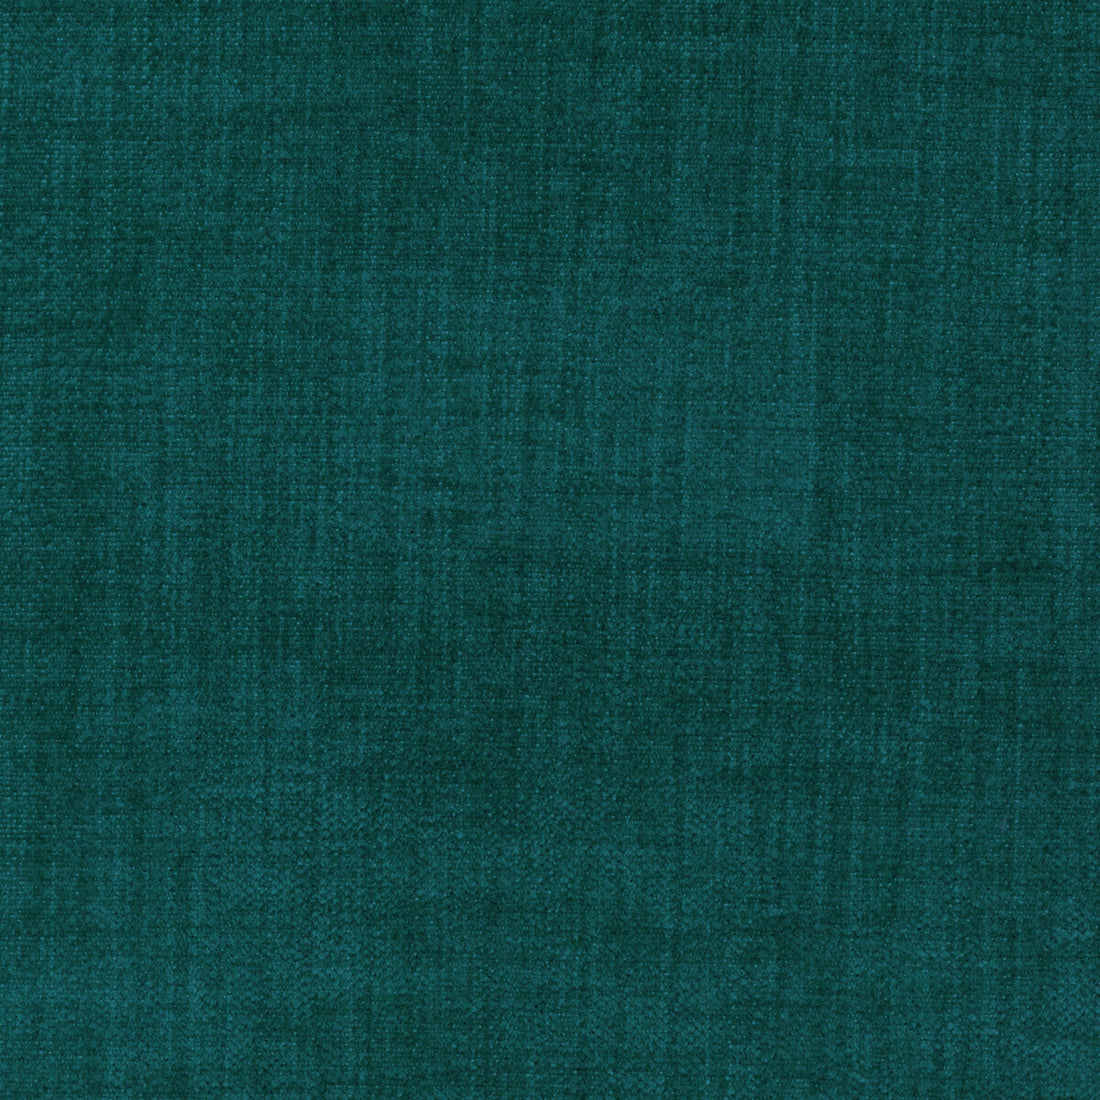 Accommodate fabric in mermaid color - pattern 36255.35.0 - by Kravet Contract in the Supreen collection